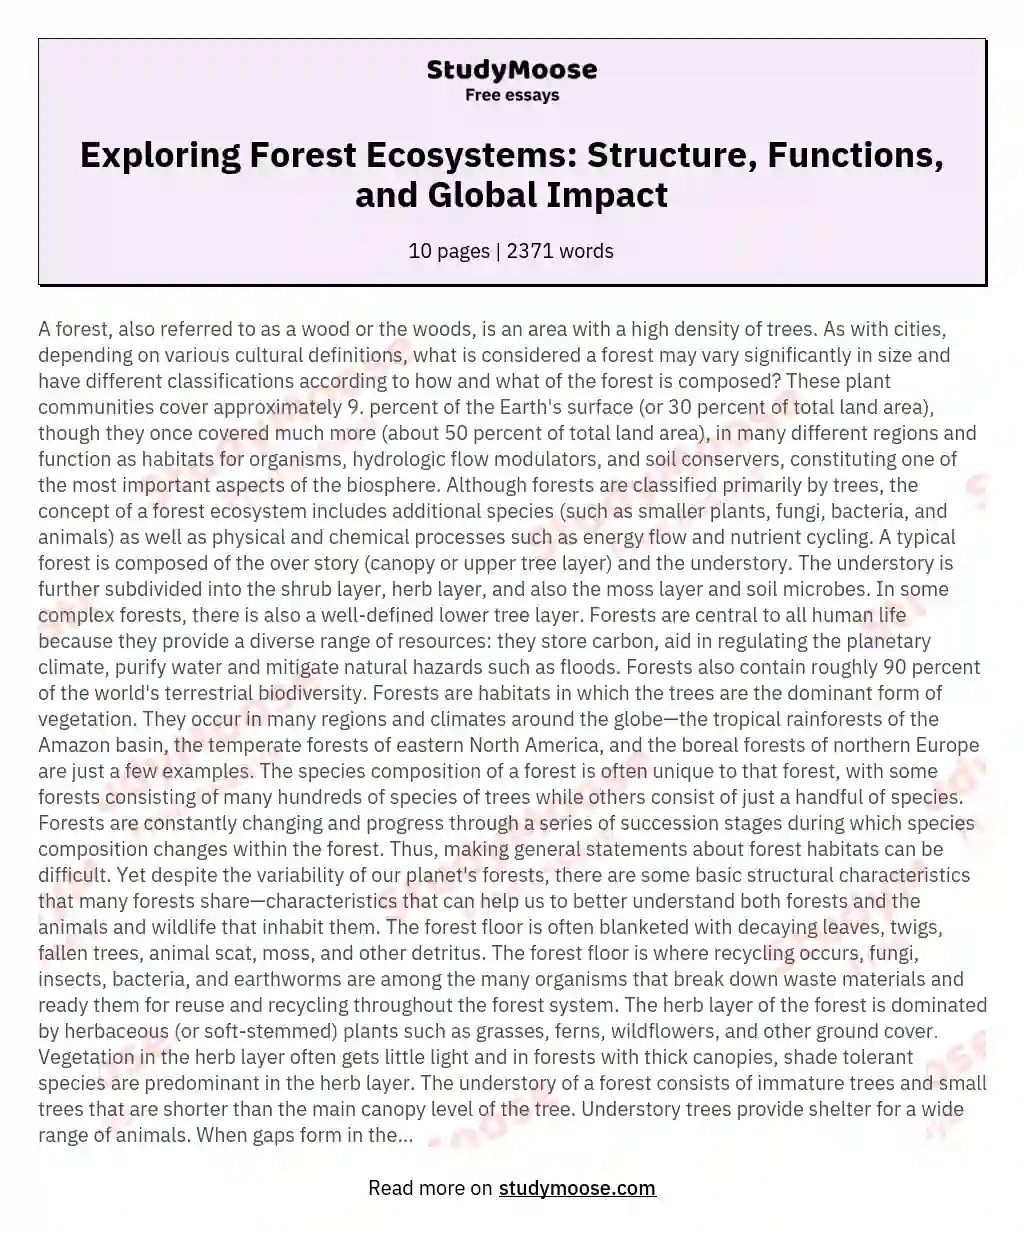 Exploring Forest Ecosystems: Structure, Functions, and Global Impact essay